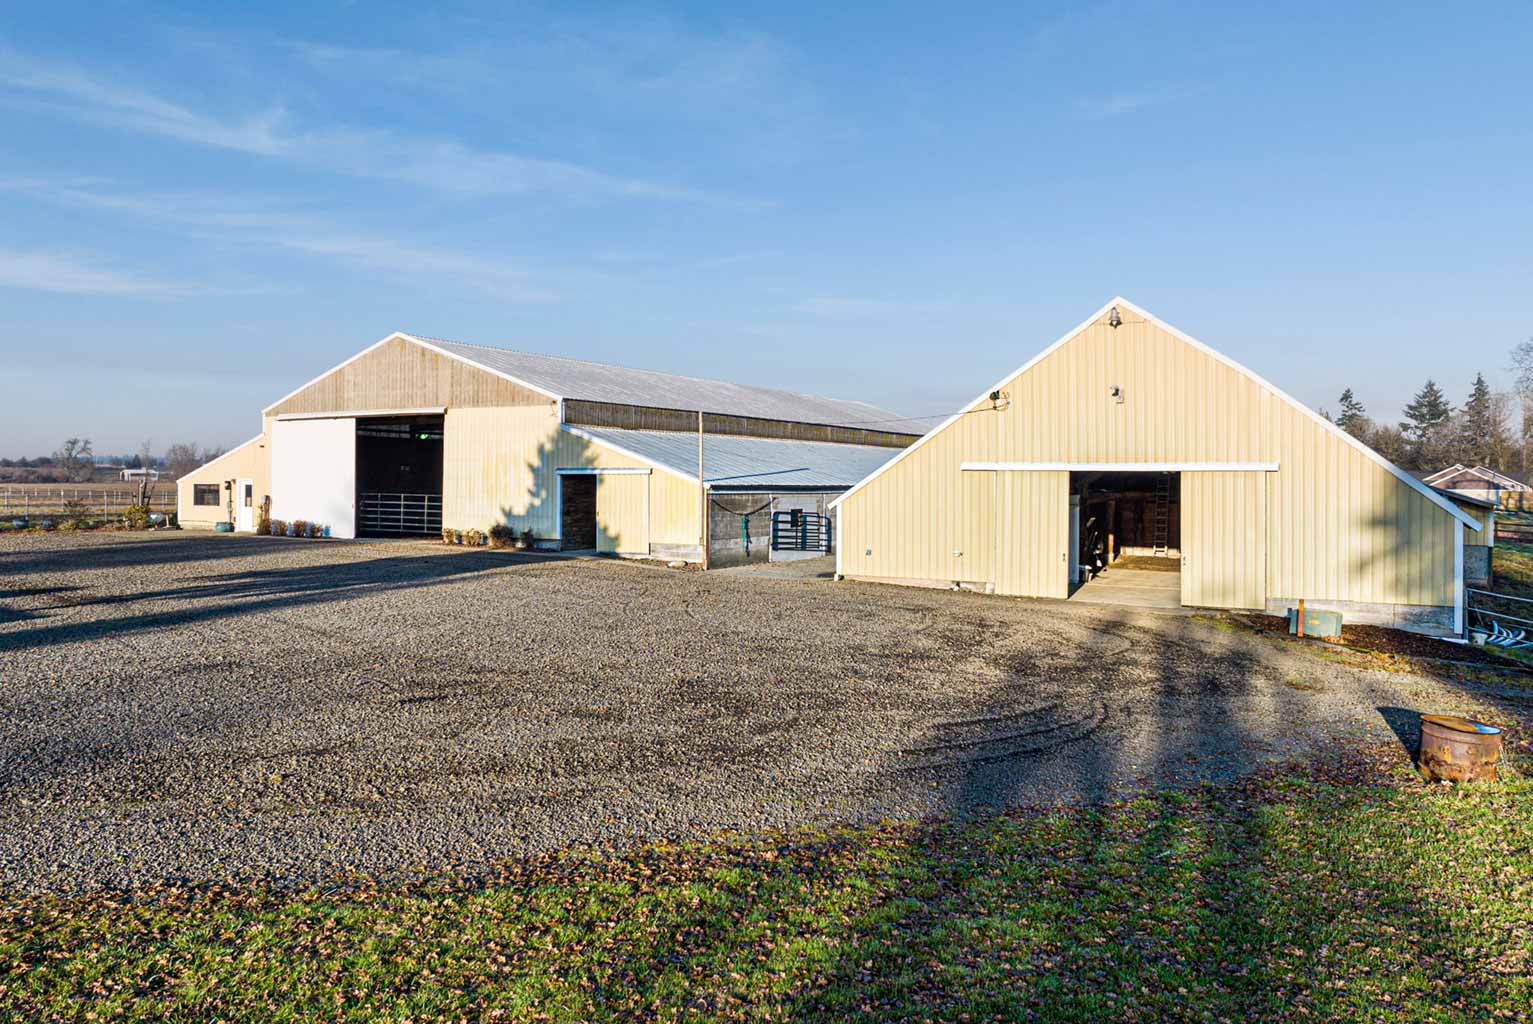 The smaller barn on the right has space for extra parking and hay storage